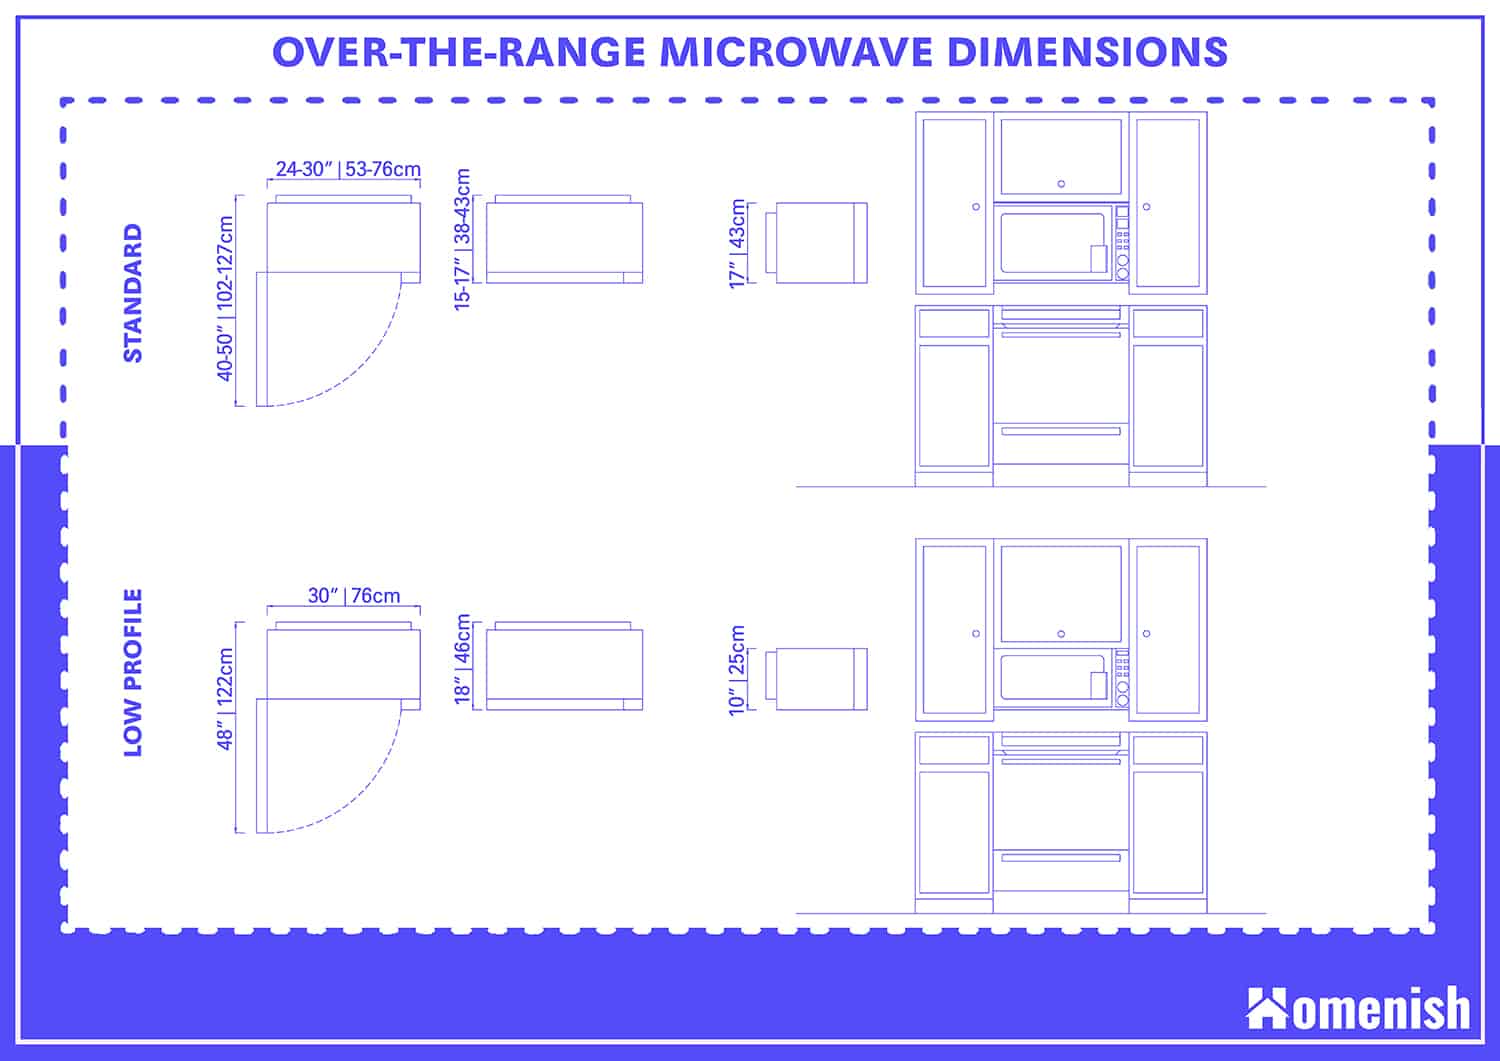 Over-the-Range Microwave Dimensions